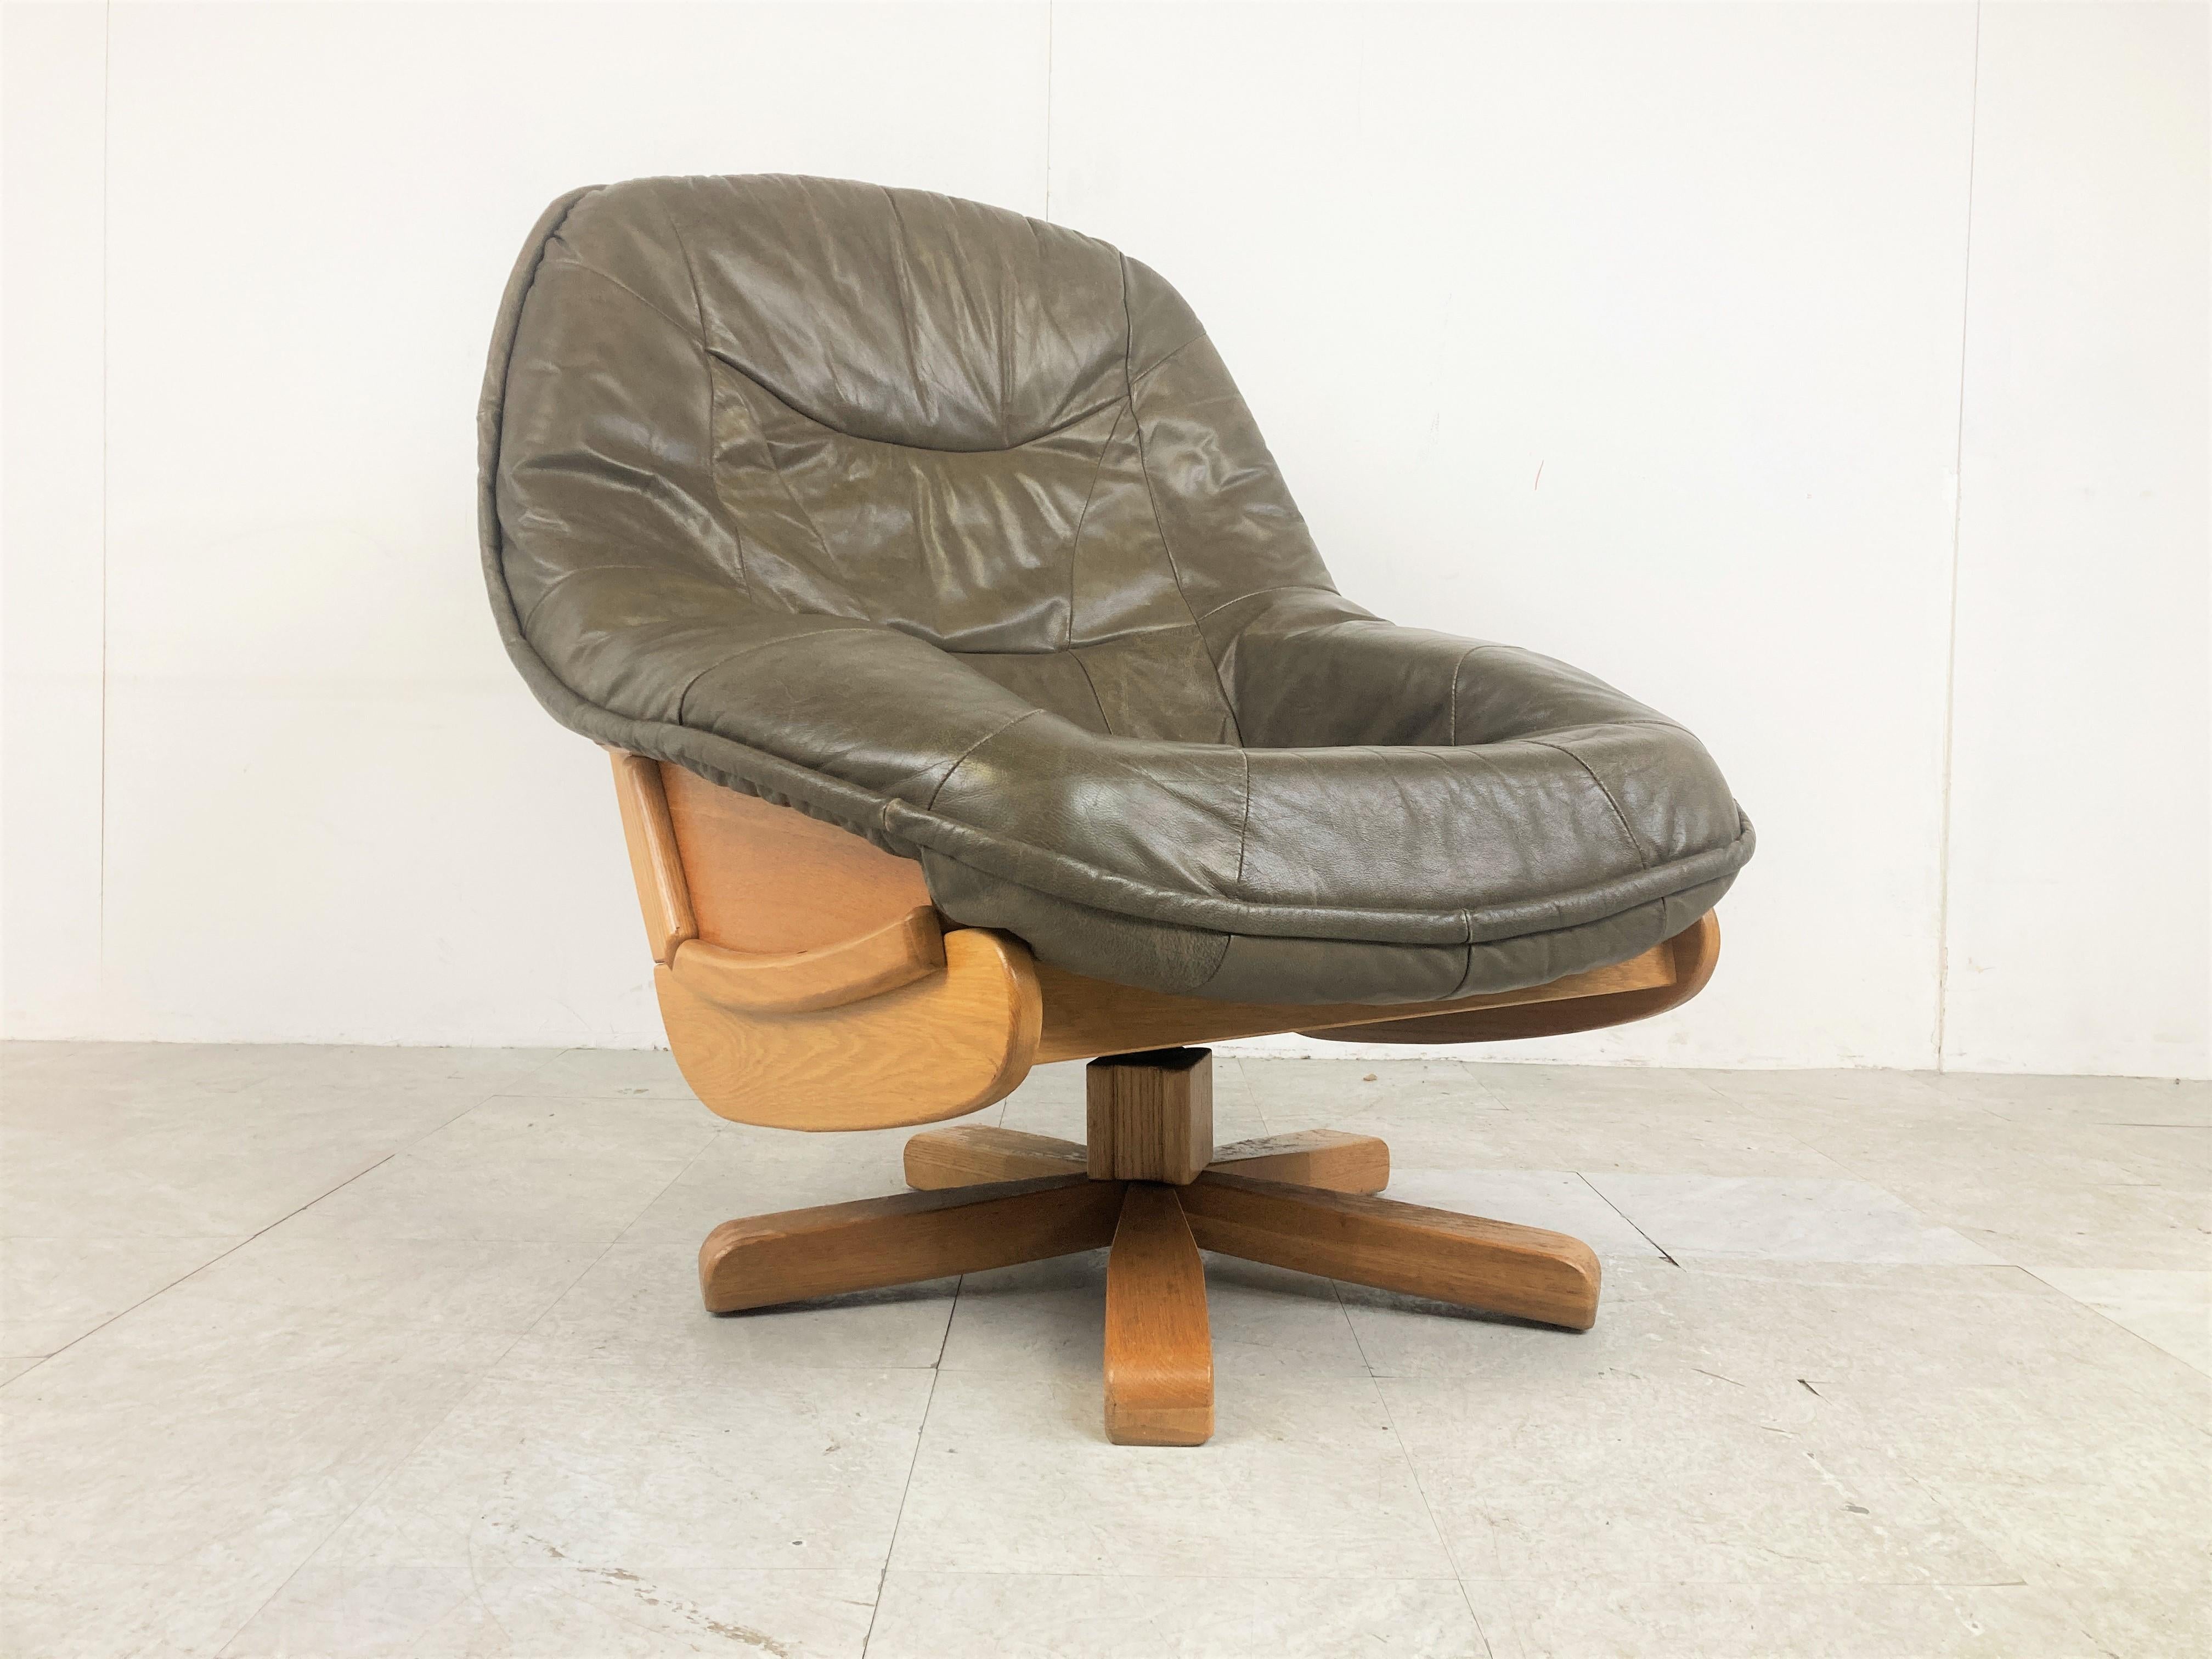 Brutalist Oak and Leather Swivel Chair, 1970s For Sale 3